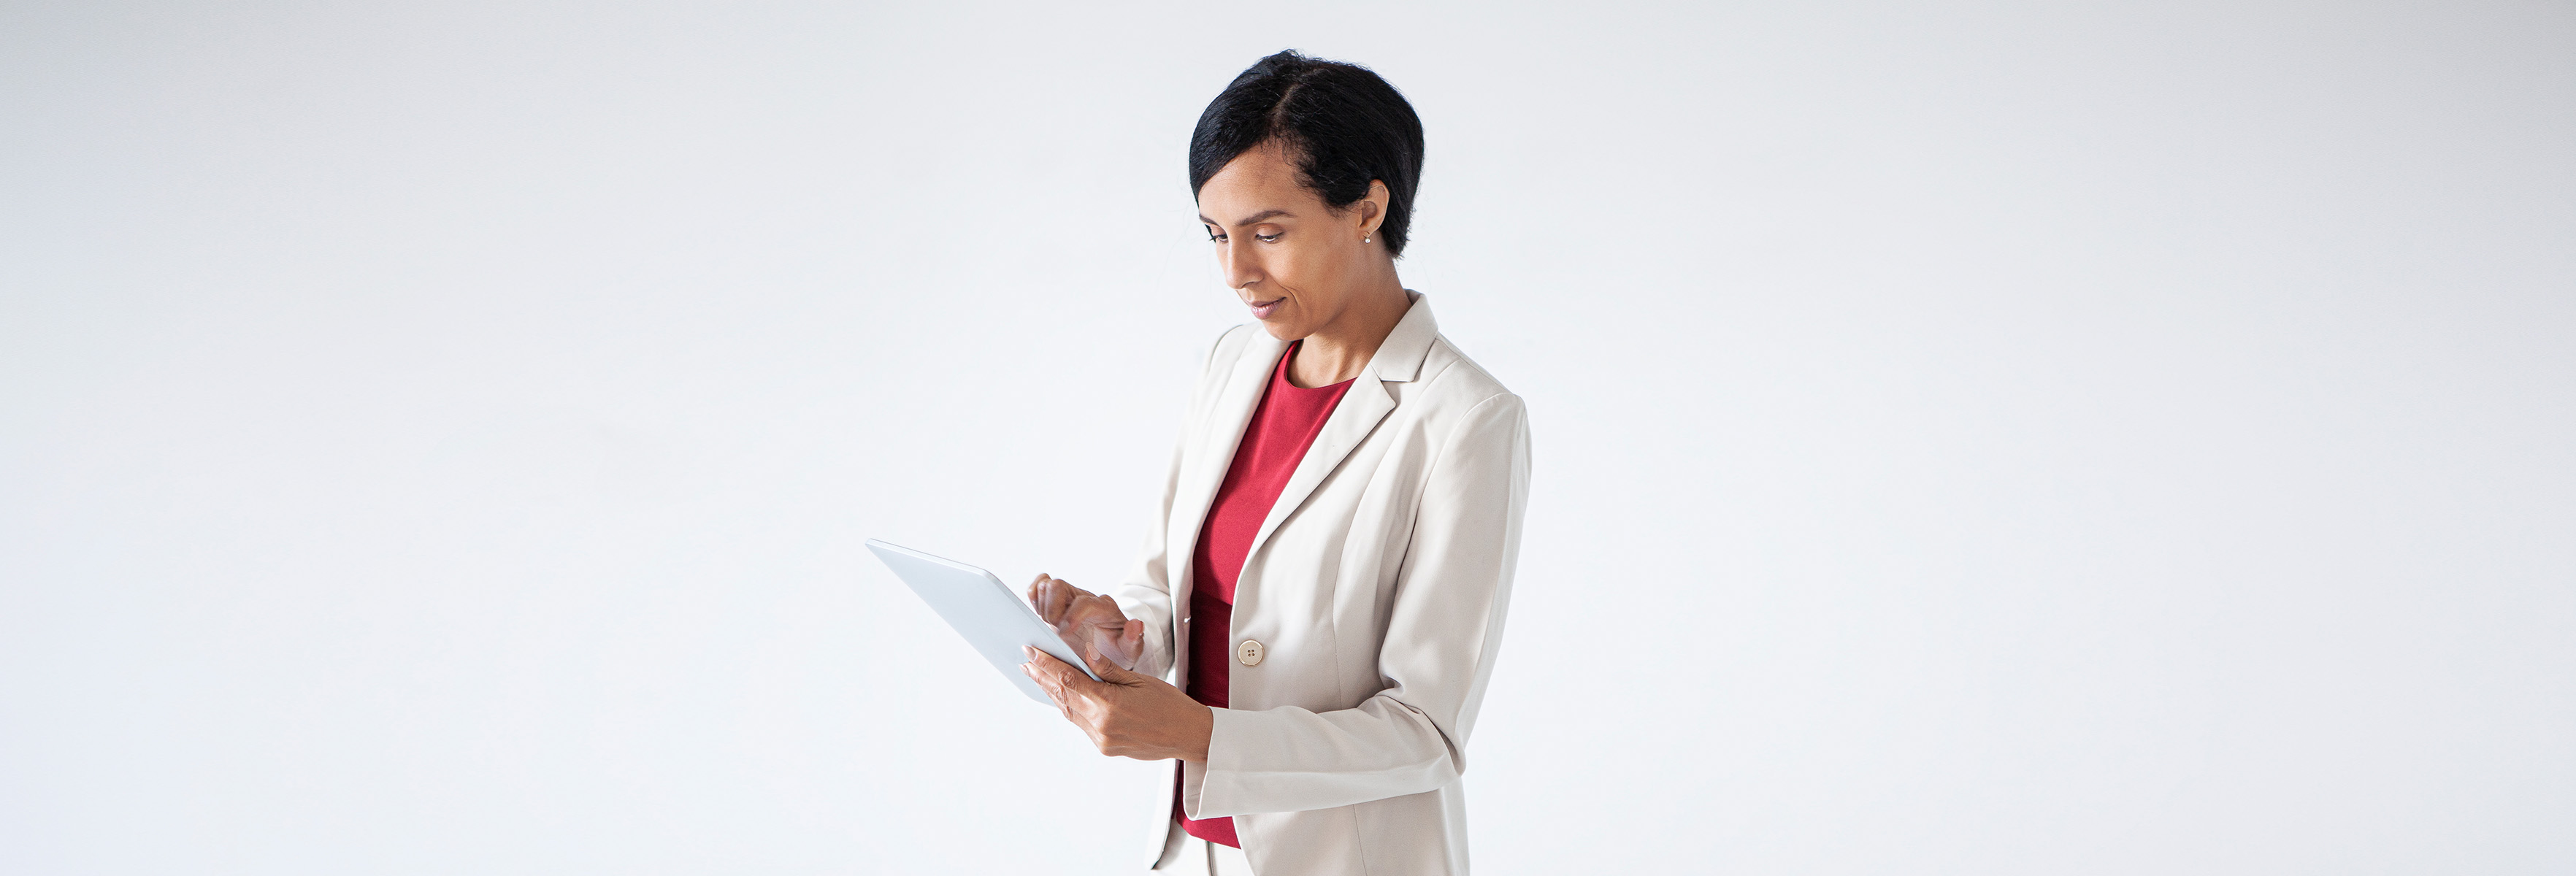 Smart dressed woman looking at her tablet